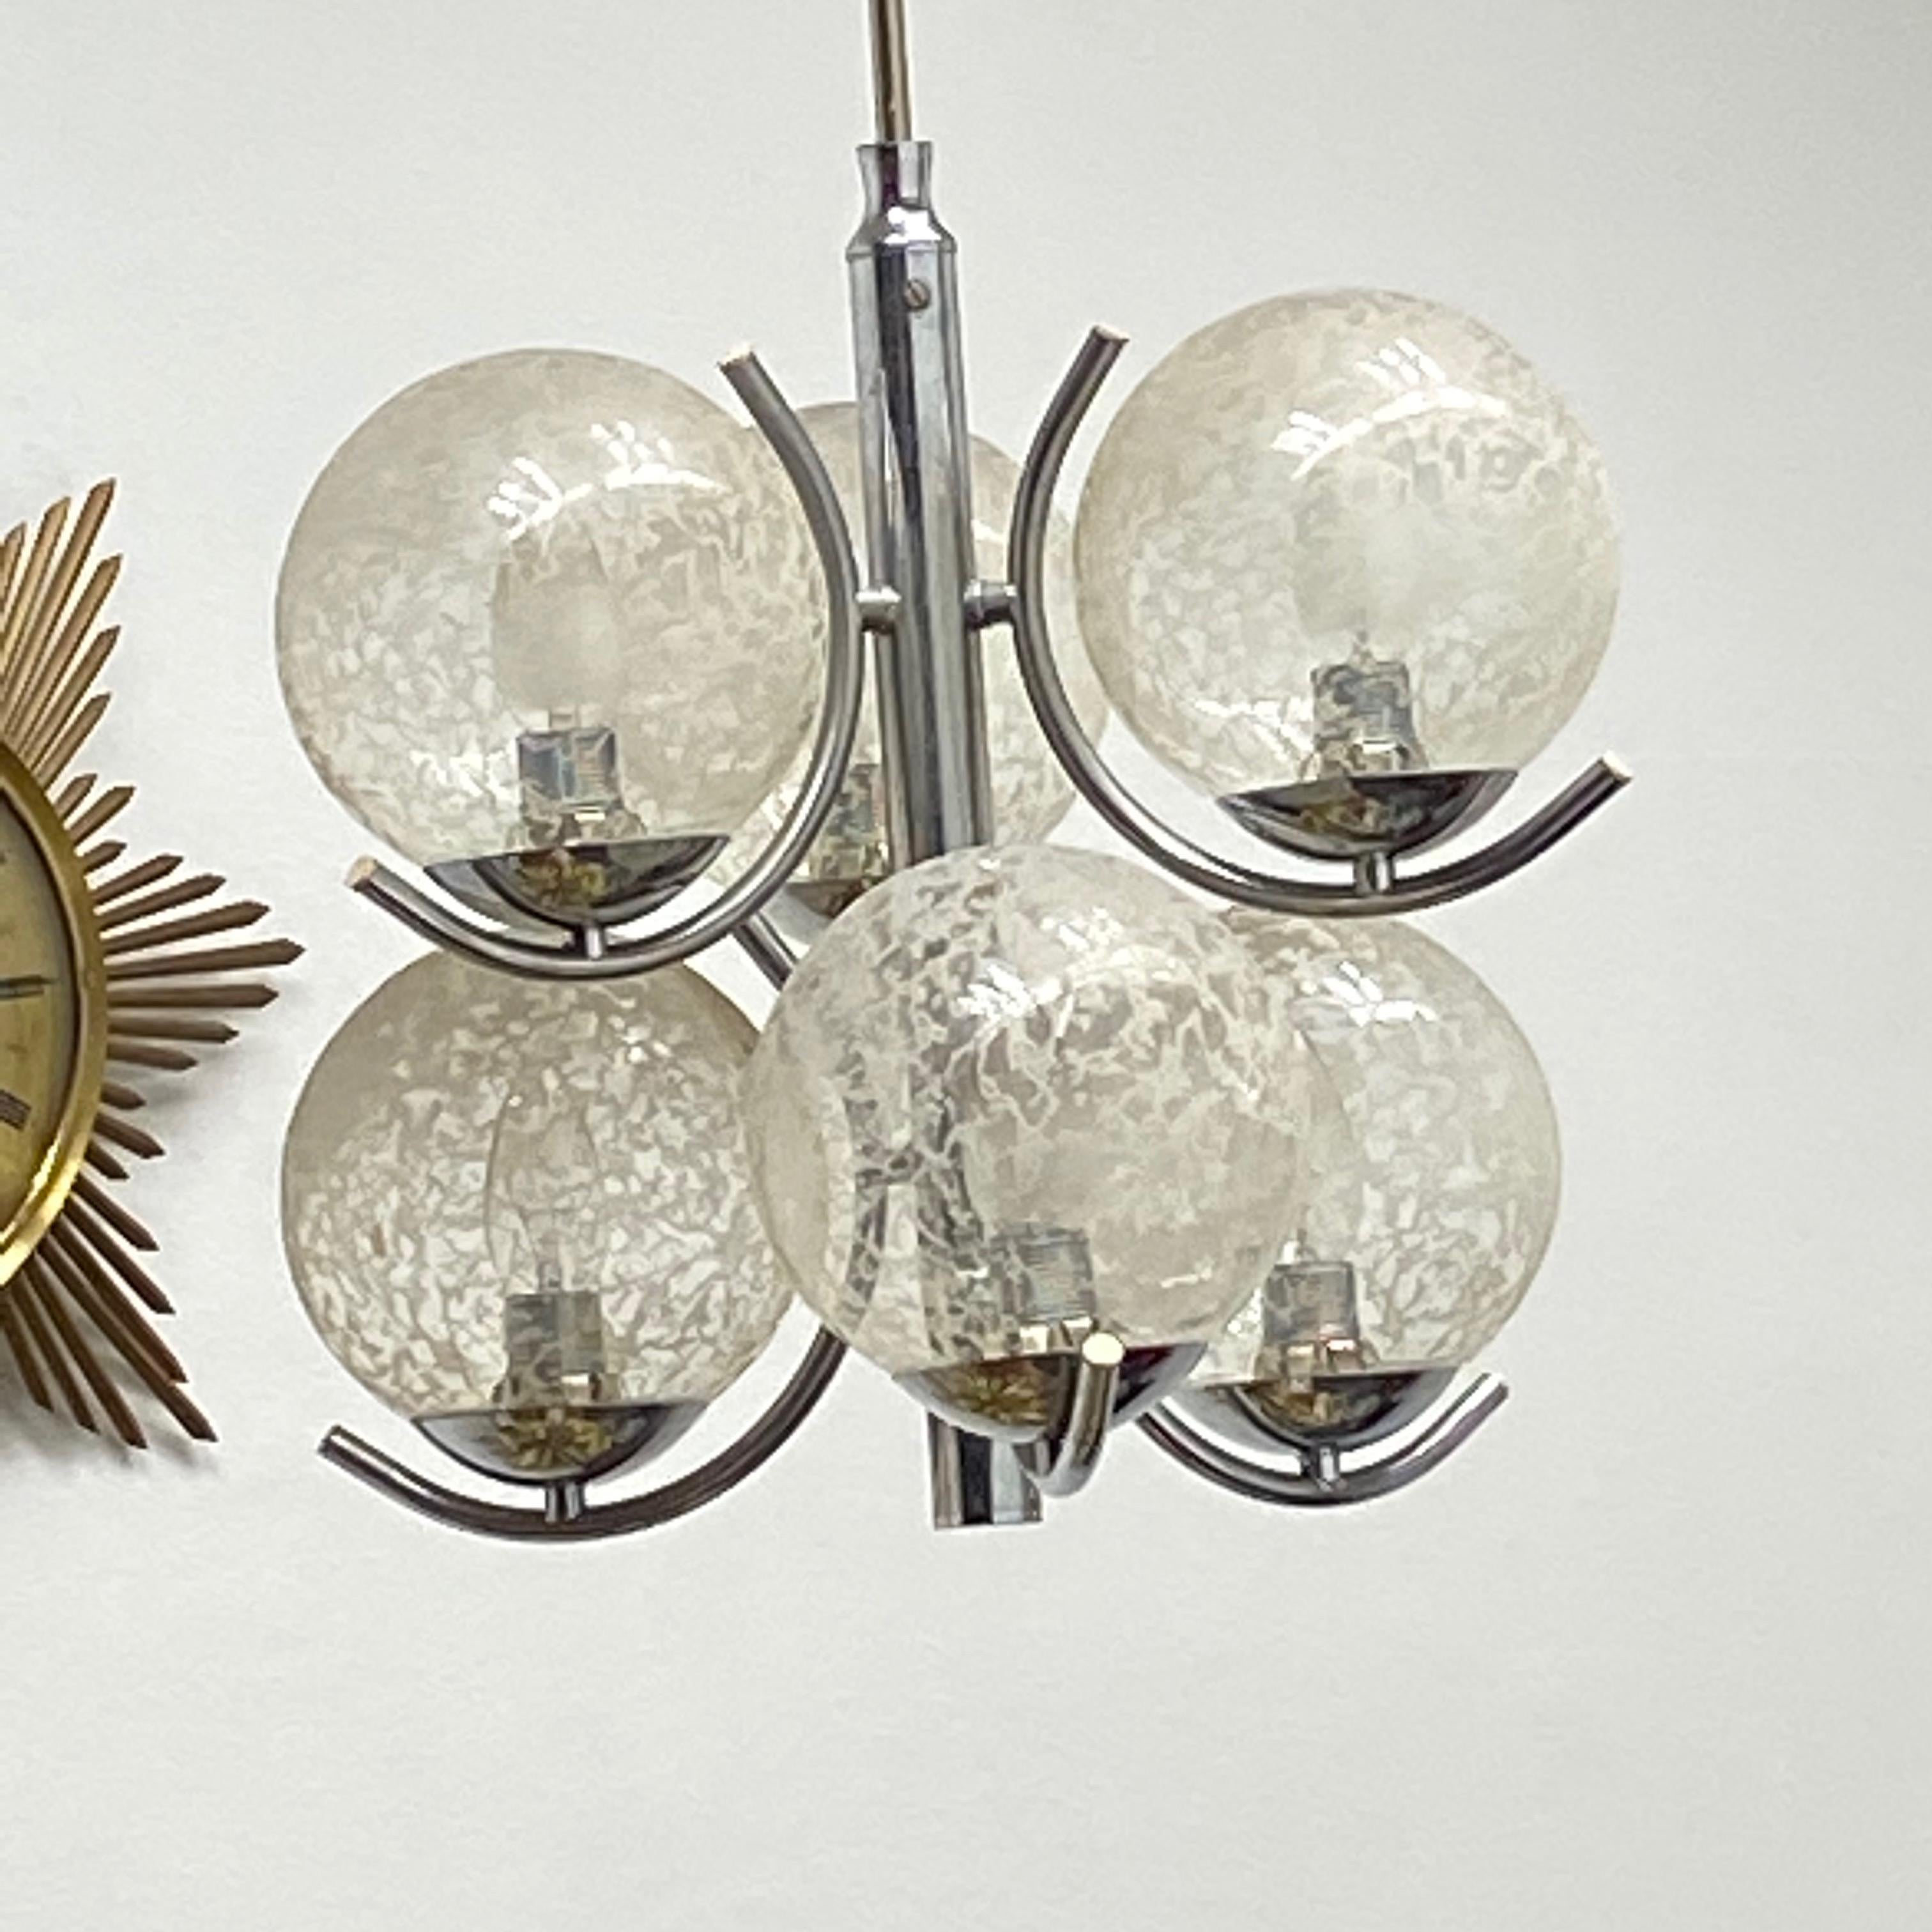 2 Tiered Richard Essig 6-Arm Space Age Chandelier, 1970s, Germany In Good Condition For Sale In Nuernberg, DE